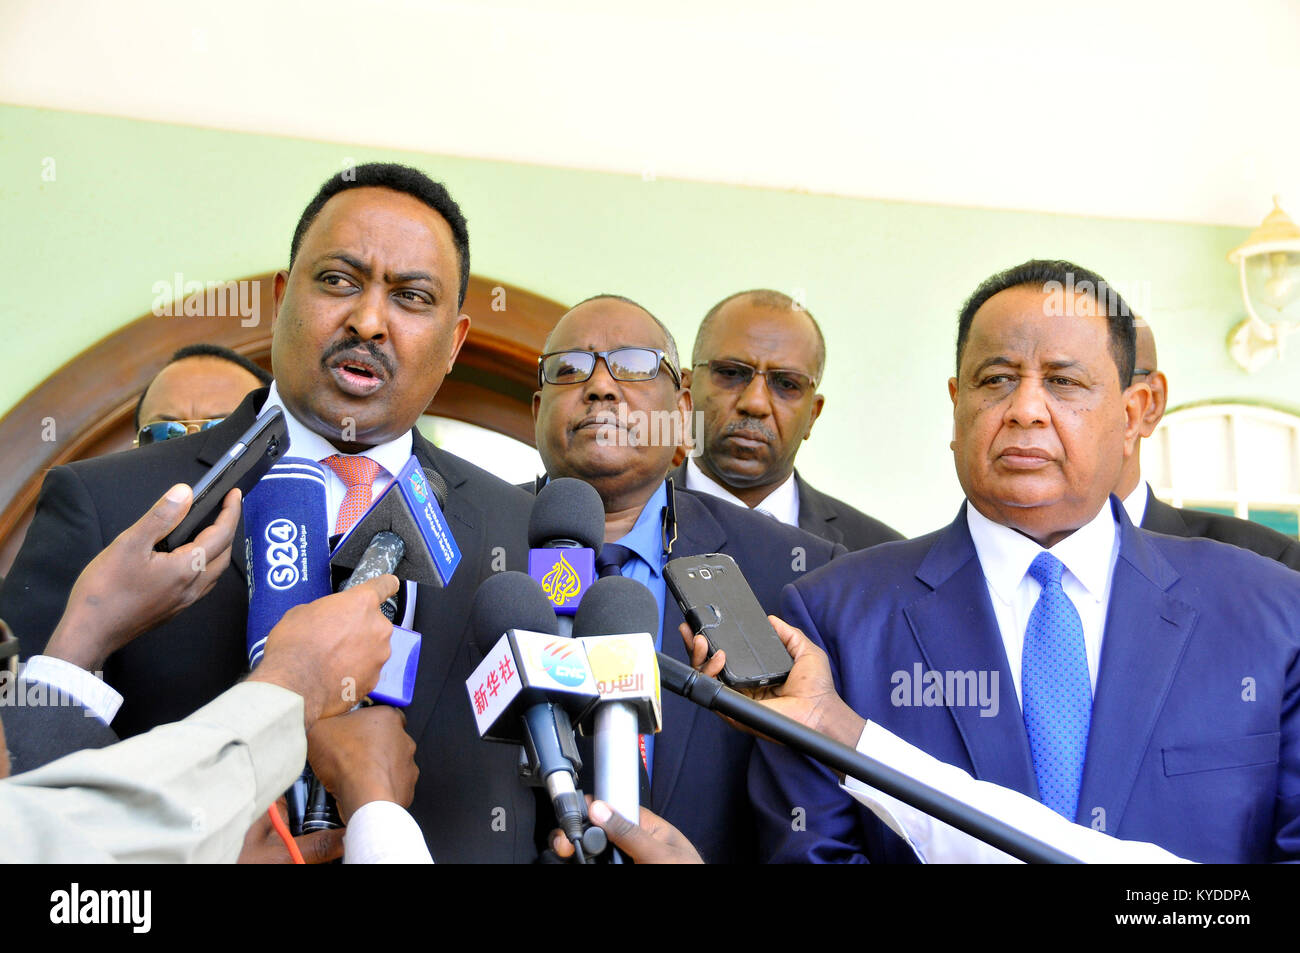 Khartoum, Sudan. 14th Jan, 2018. Ethiopian Foreign Minister Workneh Gebeyehu (L, front) speaks during a joint press conference with his Sudanese counterpart Ibrahim Ghandour (R, front) in Khartoum, Sudan, on Jan. 14, 2018. Ethiopian Foreign Minister Workneh Gebeyehu was on an official visit to Ethiopia's neighboring country Sudan. Credit: Mohamed Babiker/Xinhua/Alamy Live News Stock Photo